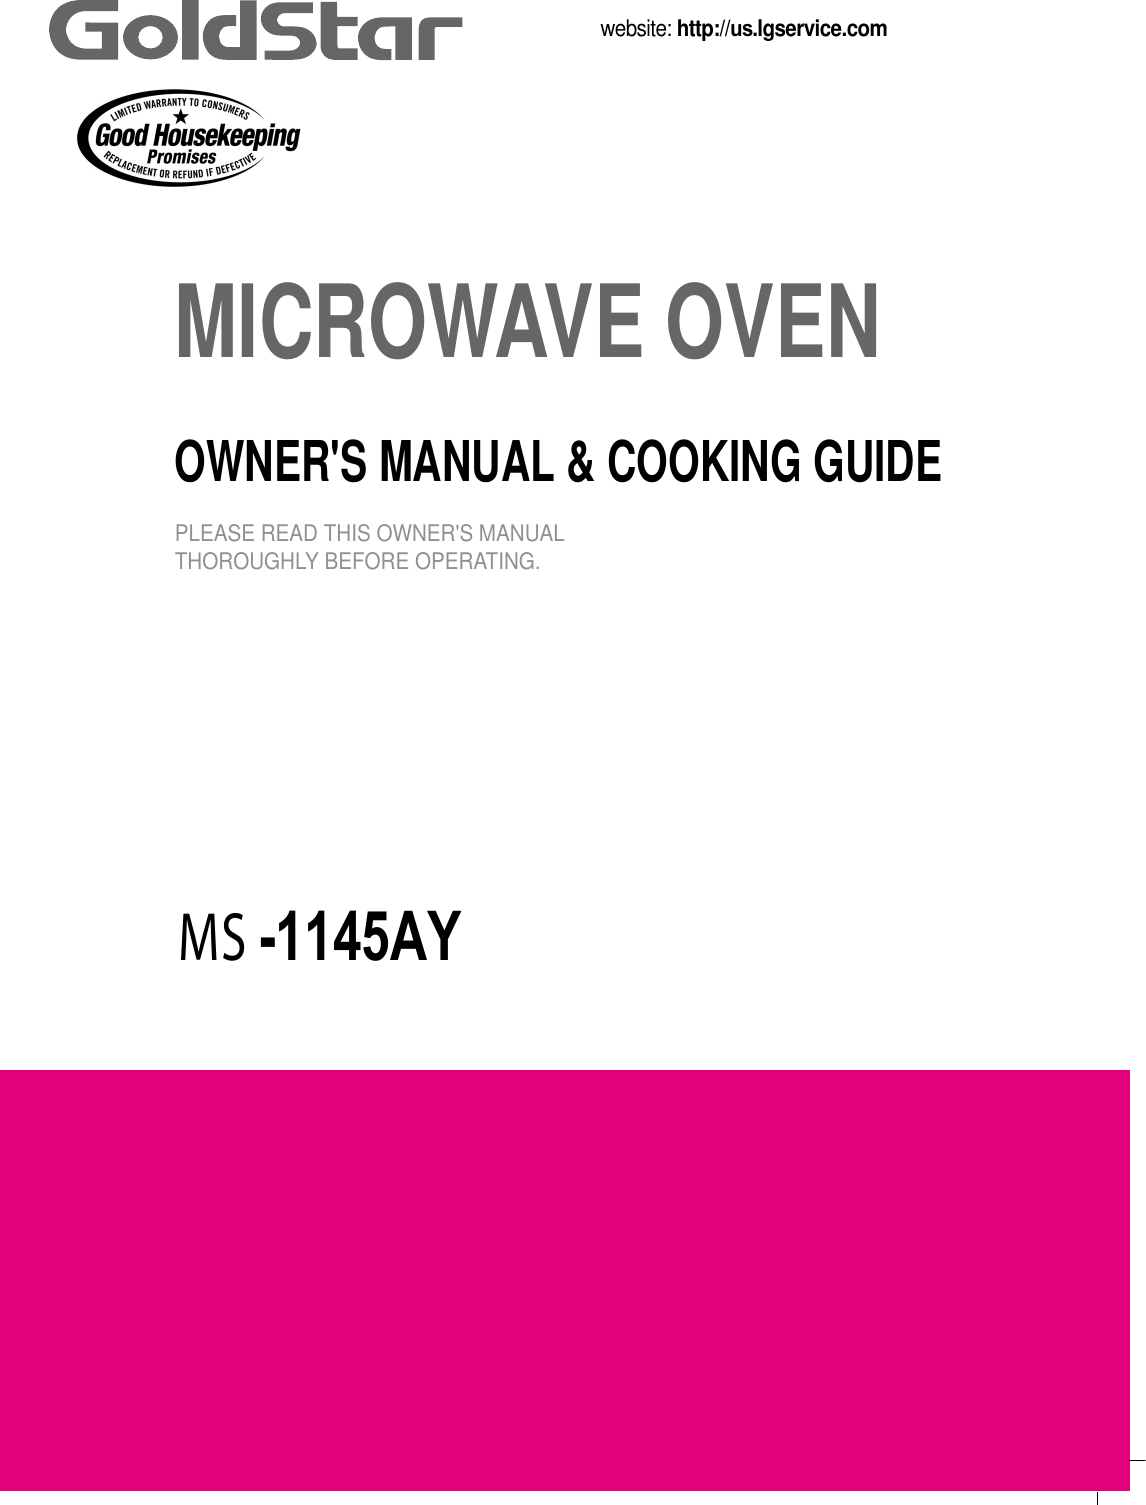 MICROWAVE OVENOWNER&apos;S MANUAL &amp; COOKING GUIDEPLEASE READ THIS OWNER&apos;S MANUALTHOROUGHLY BEFORE OPERATING.website: http://us.lgservice.com MS -1145AY